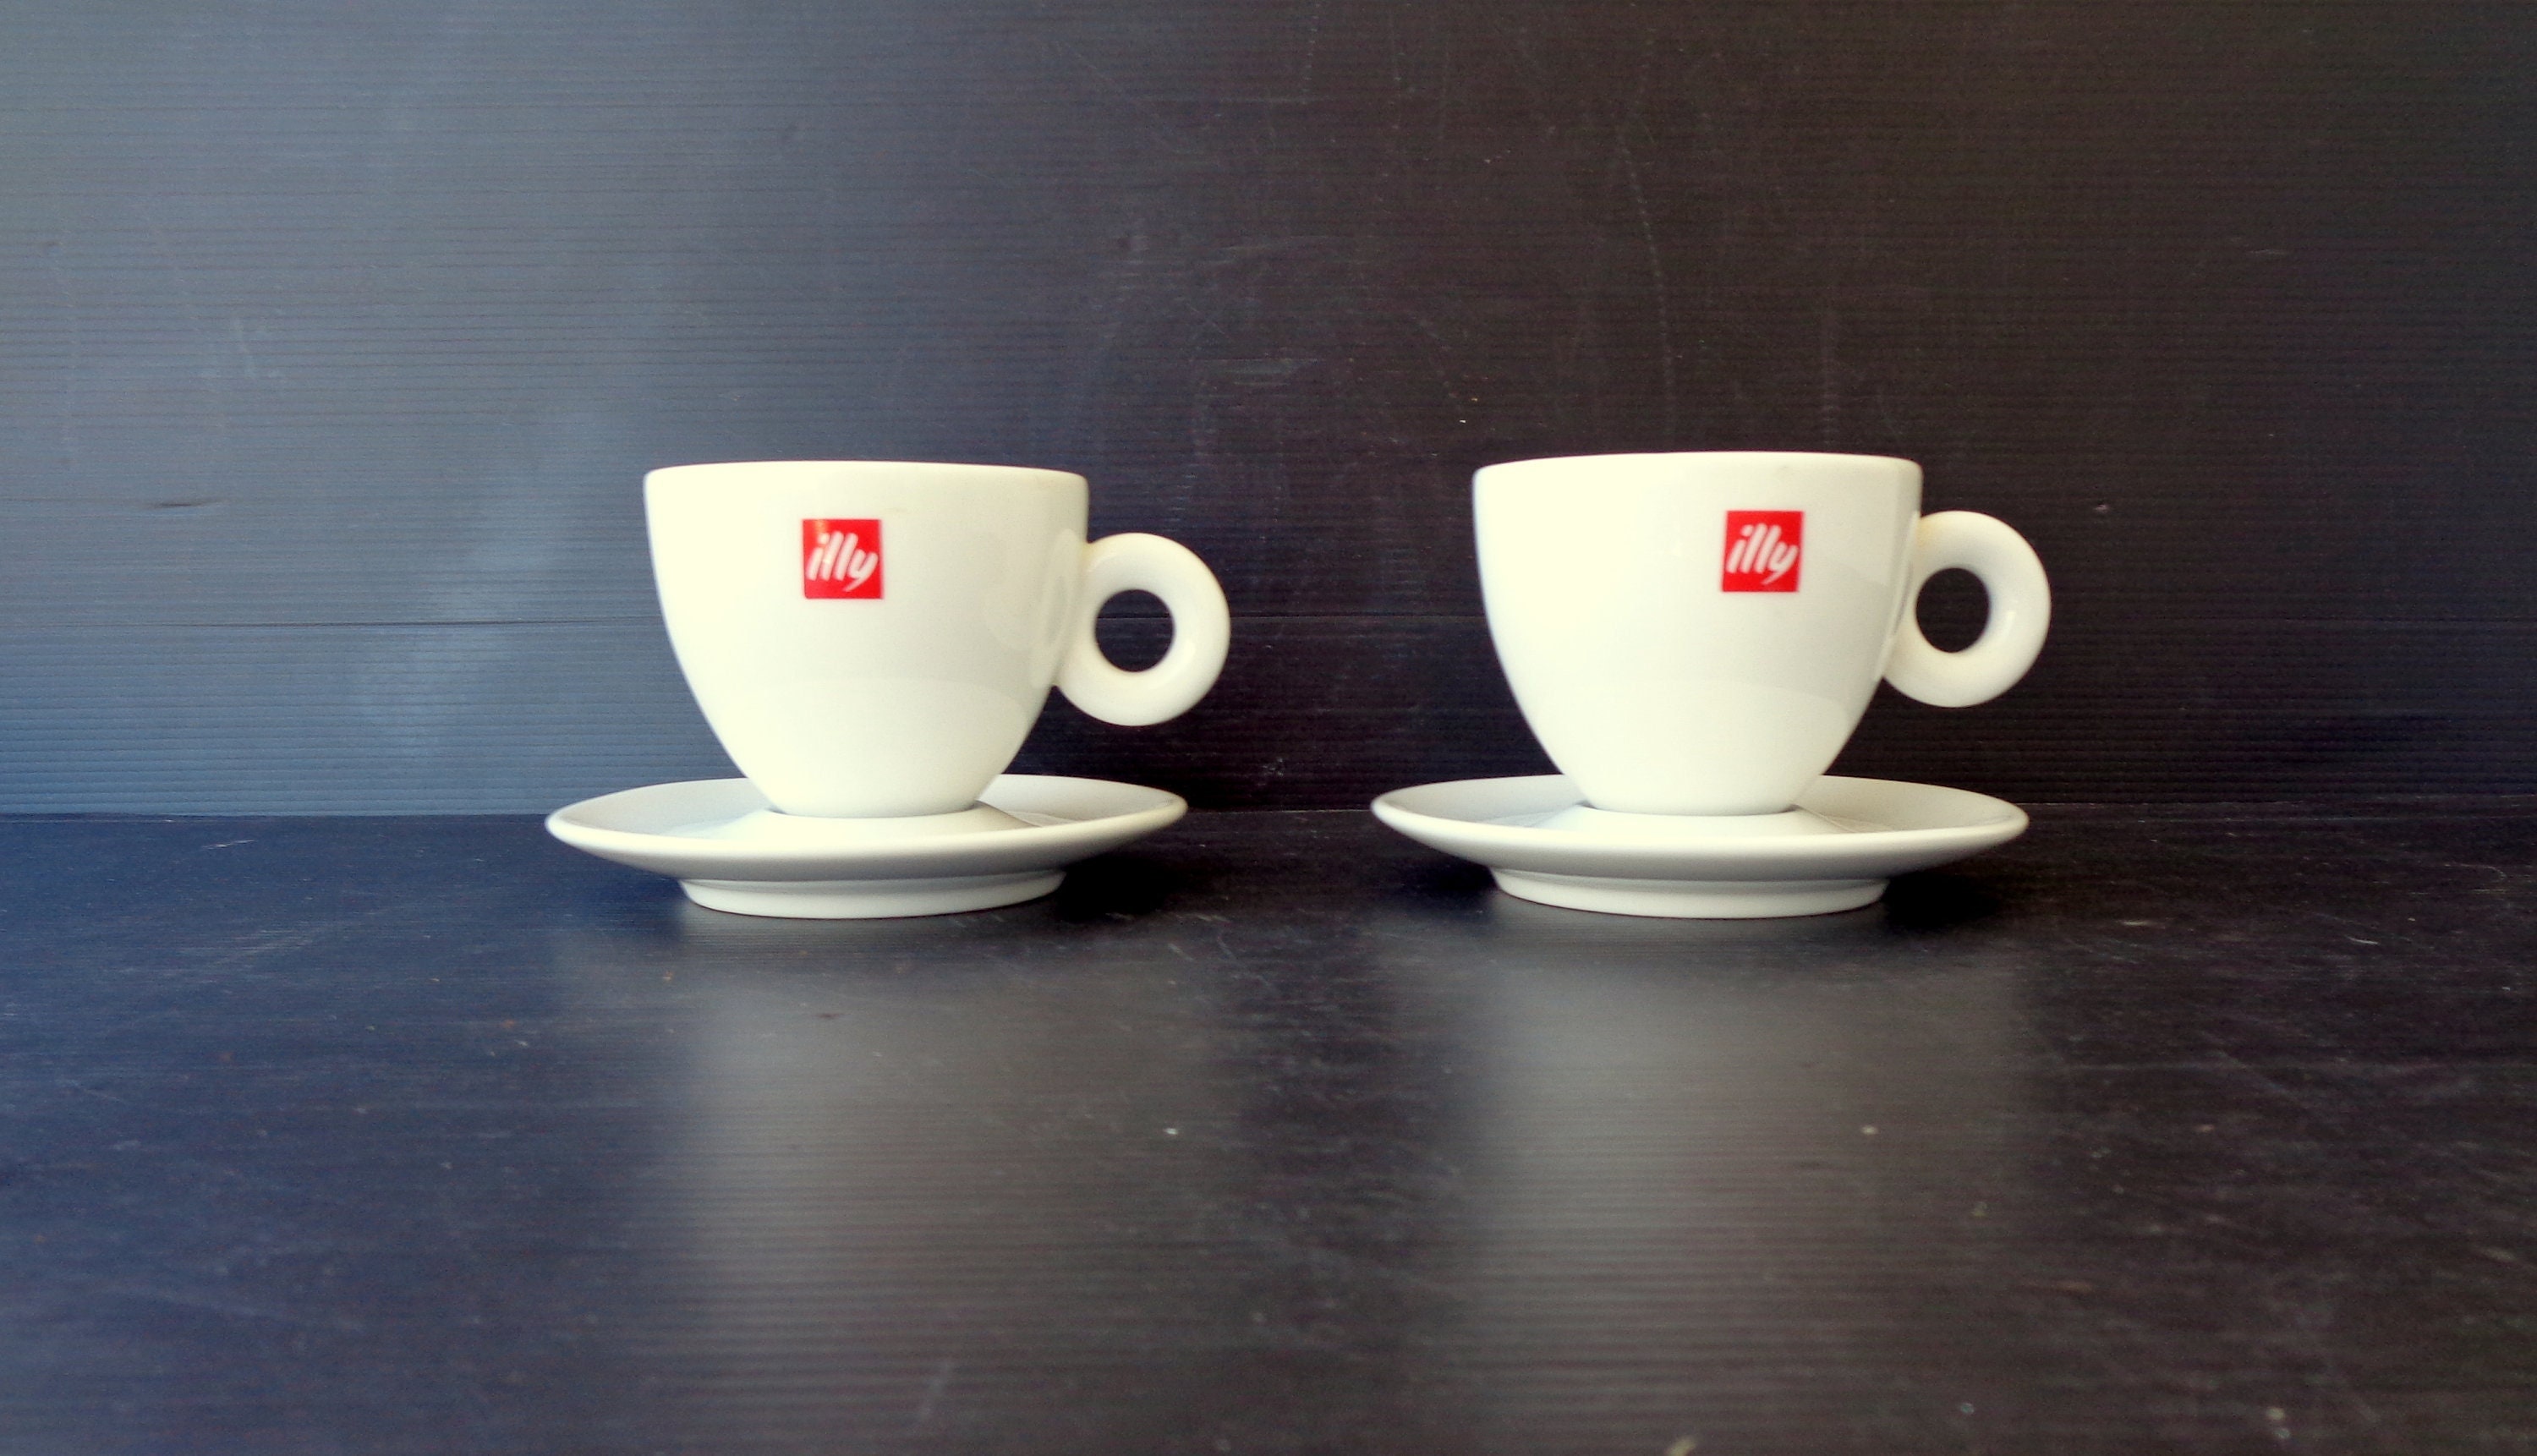 illy Latte Glasses - Set of 6